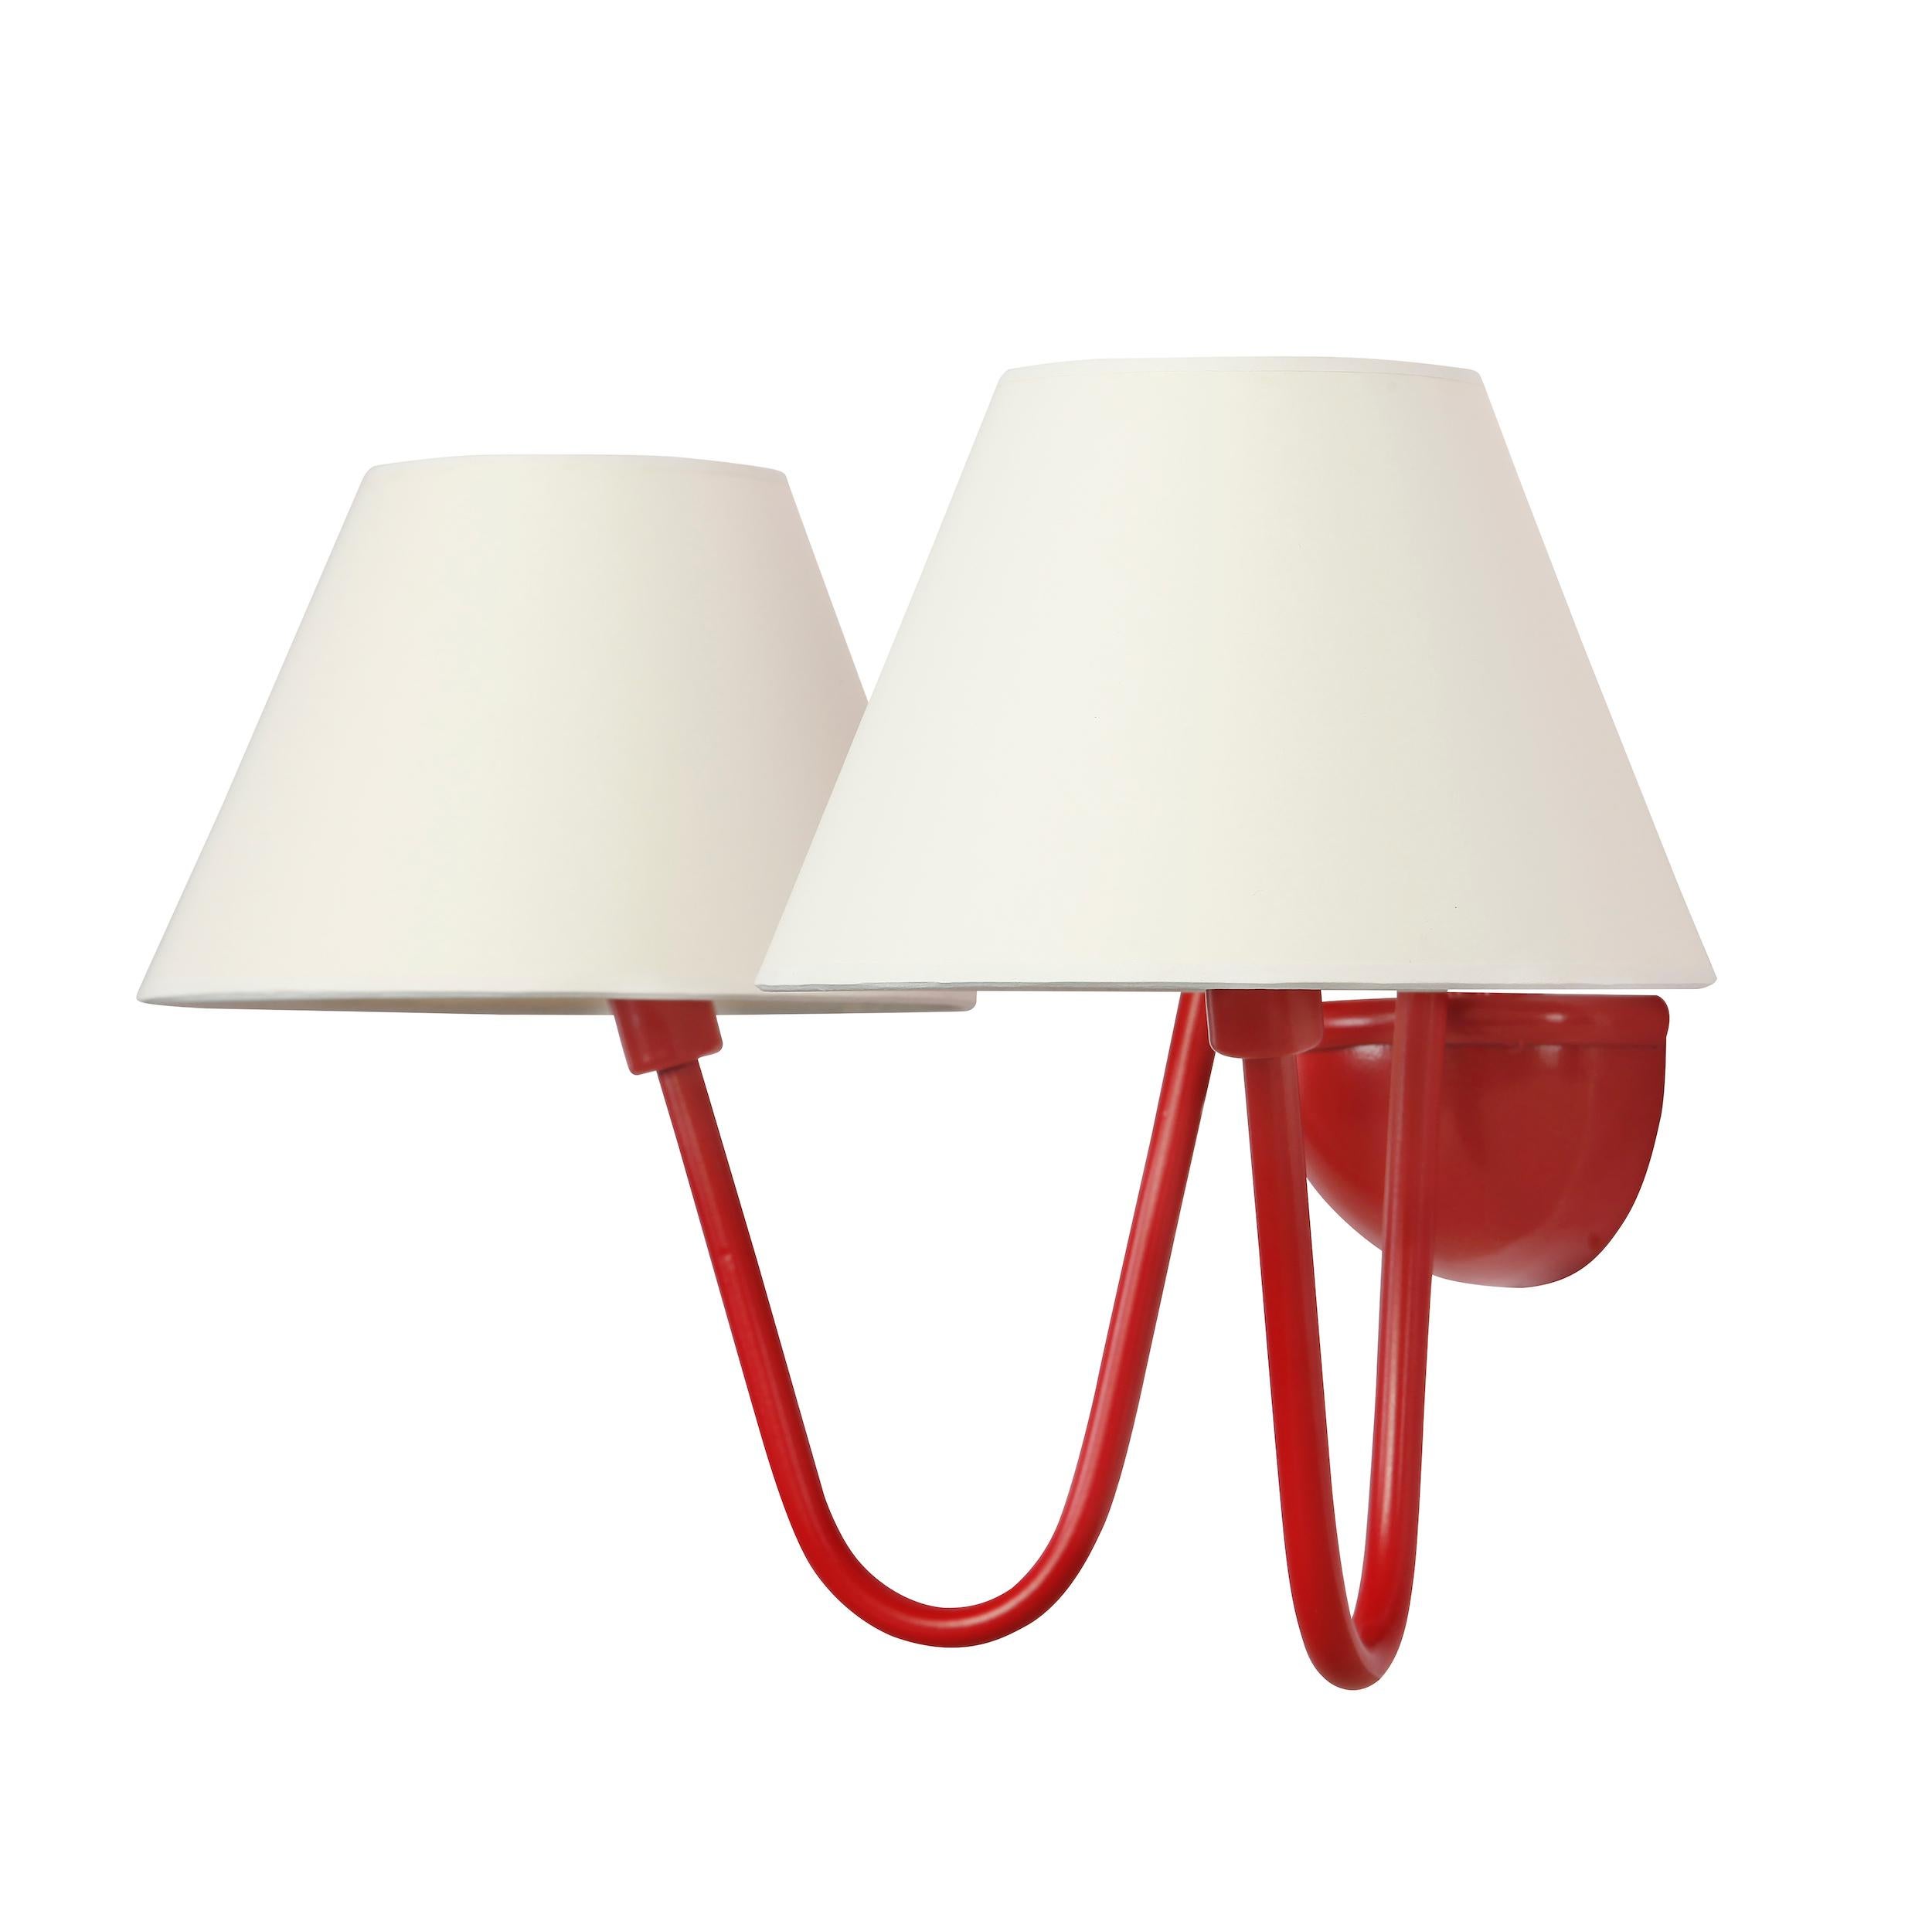 Two-arm 'Bouquet' red wall lamp in the style of Jean Royère. Handcrafted in Los Angeles in the workshop of noted French designer and antiques dealer Denis de le Mesiere, who pays homage to the work of Jean Royere with scrupulous attention to detail